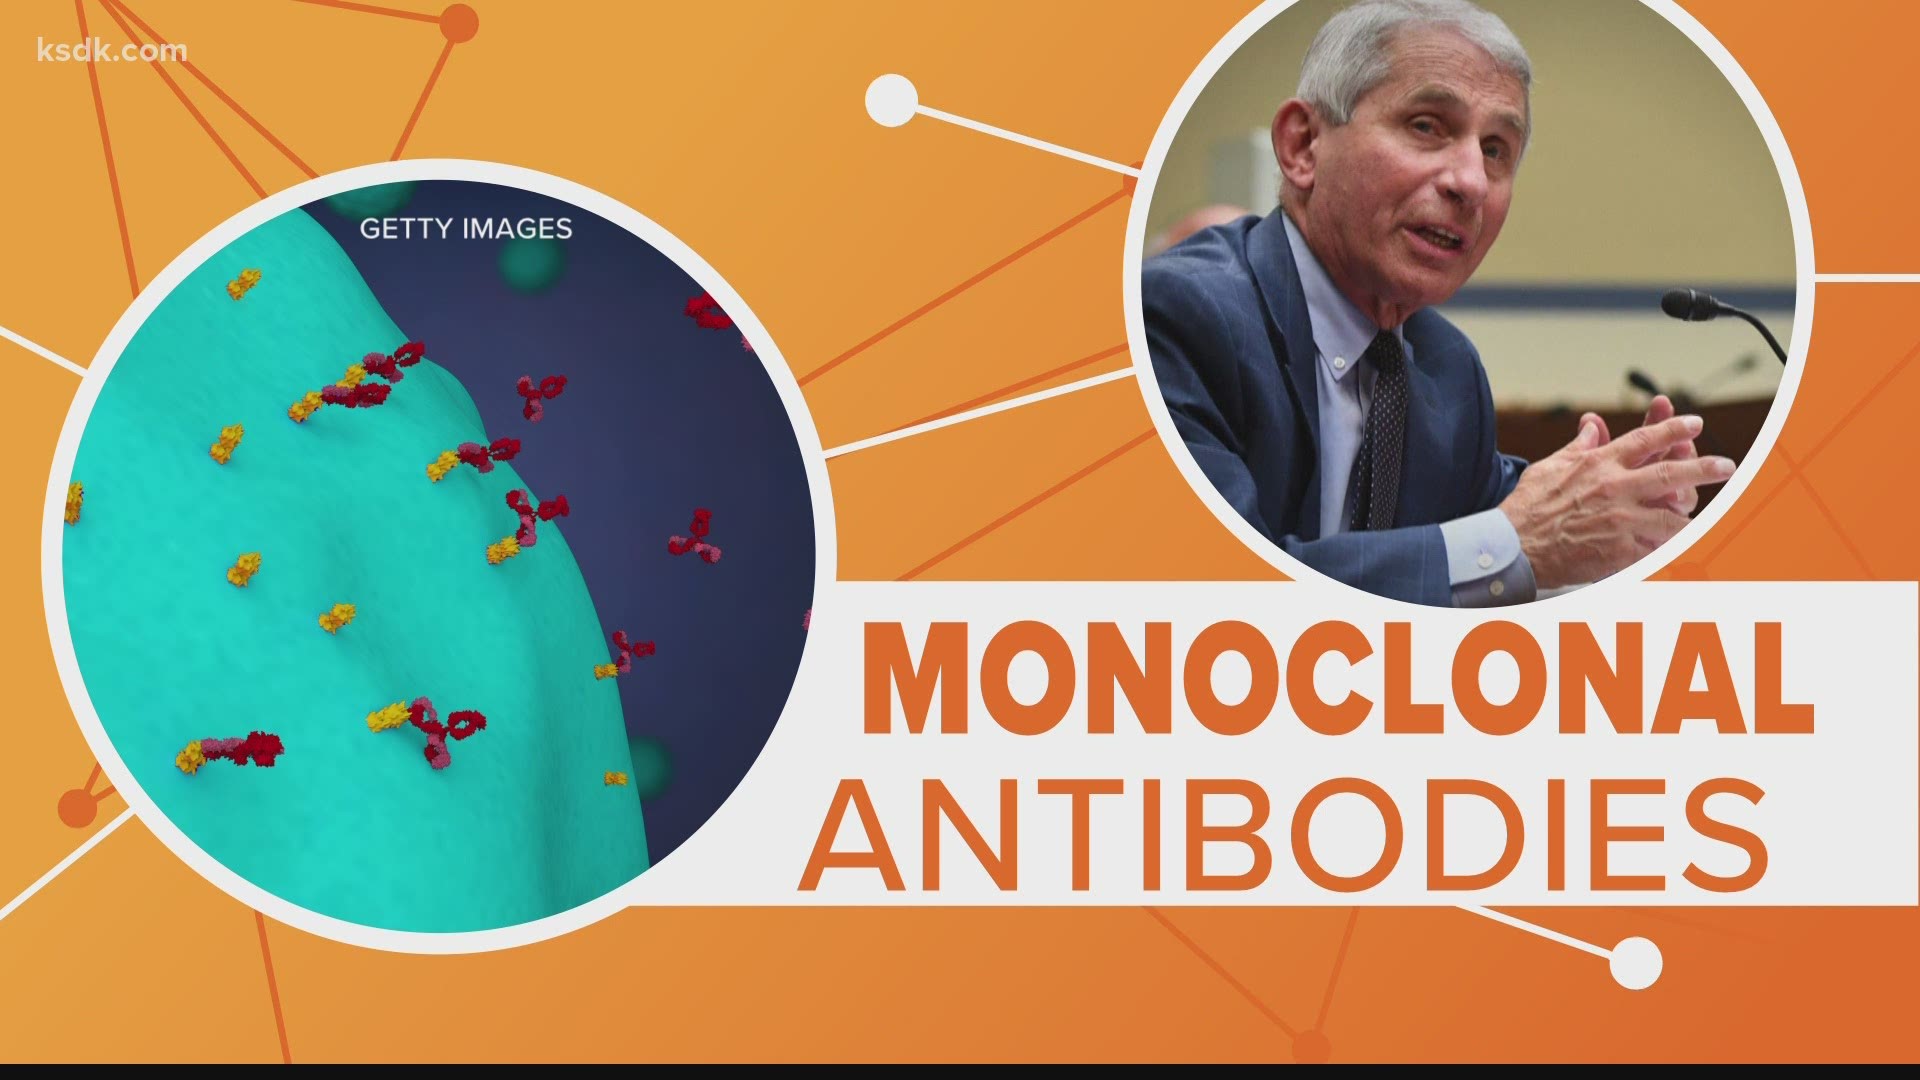 Experts credit monoclonal antibodies for the president's speedy recovery. Drugmakers are pushing the FDA for emergency-use authorization to make it more accessible.